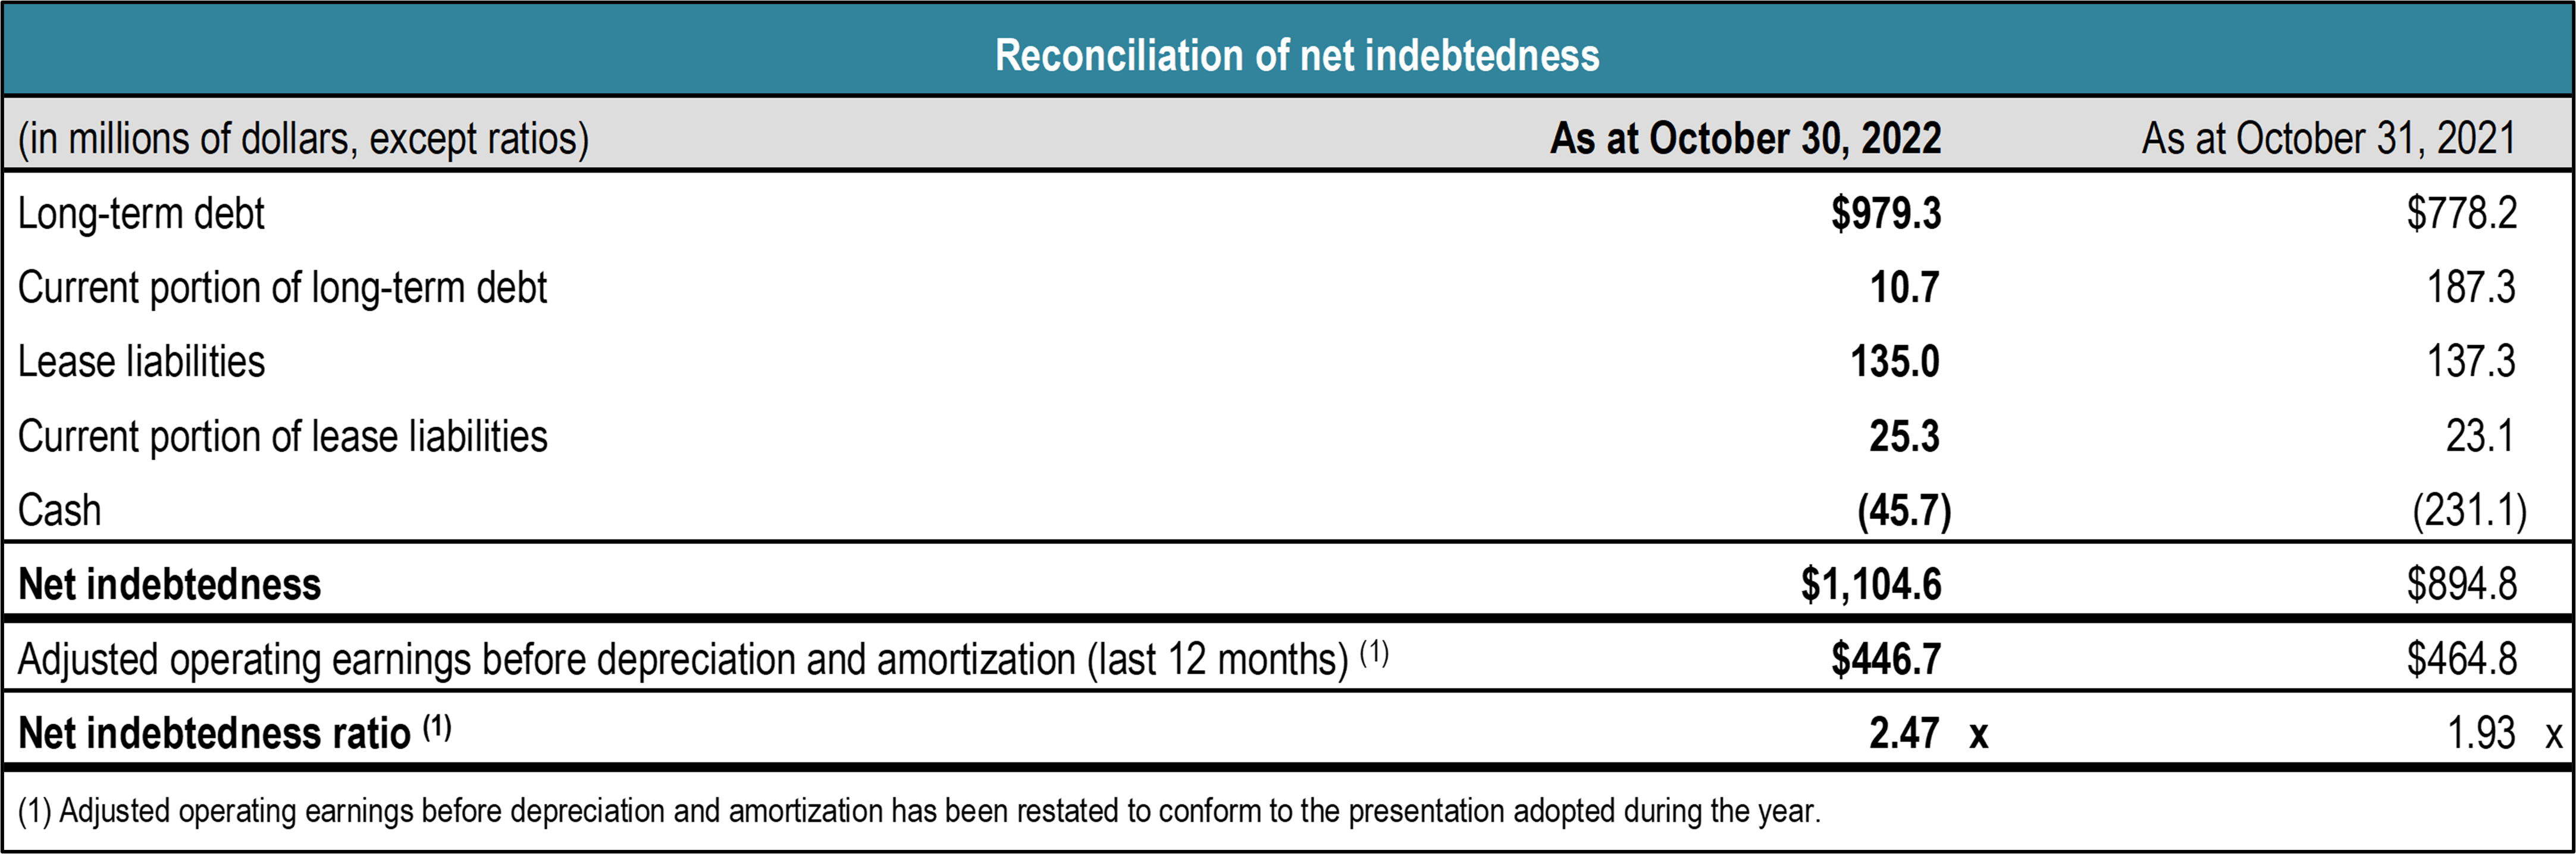 table reconciliation net indebtedness Q4 2022